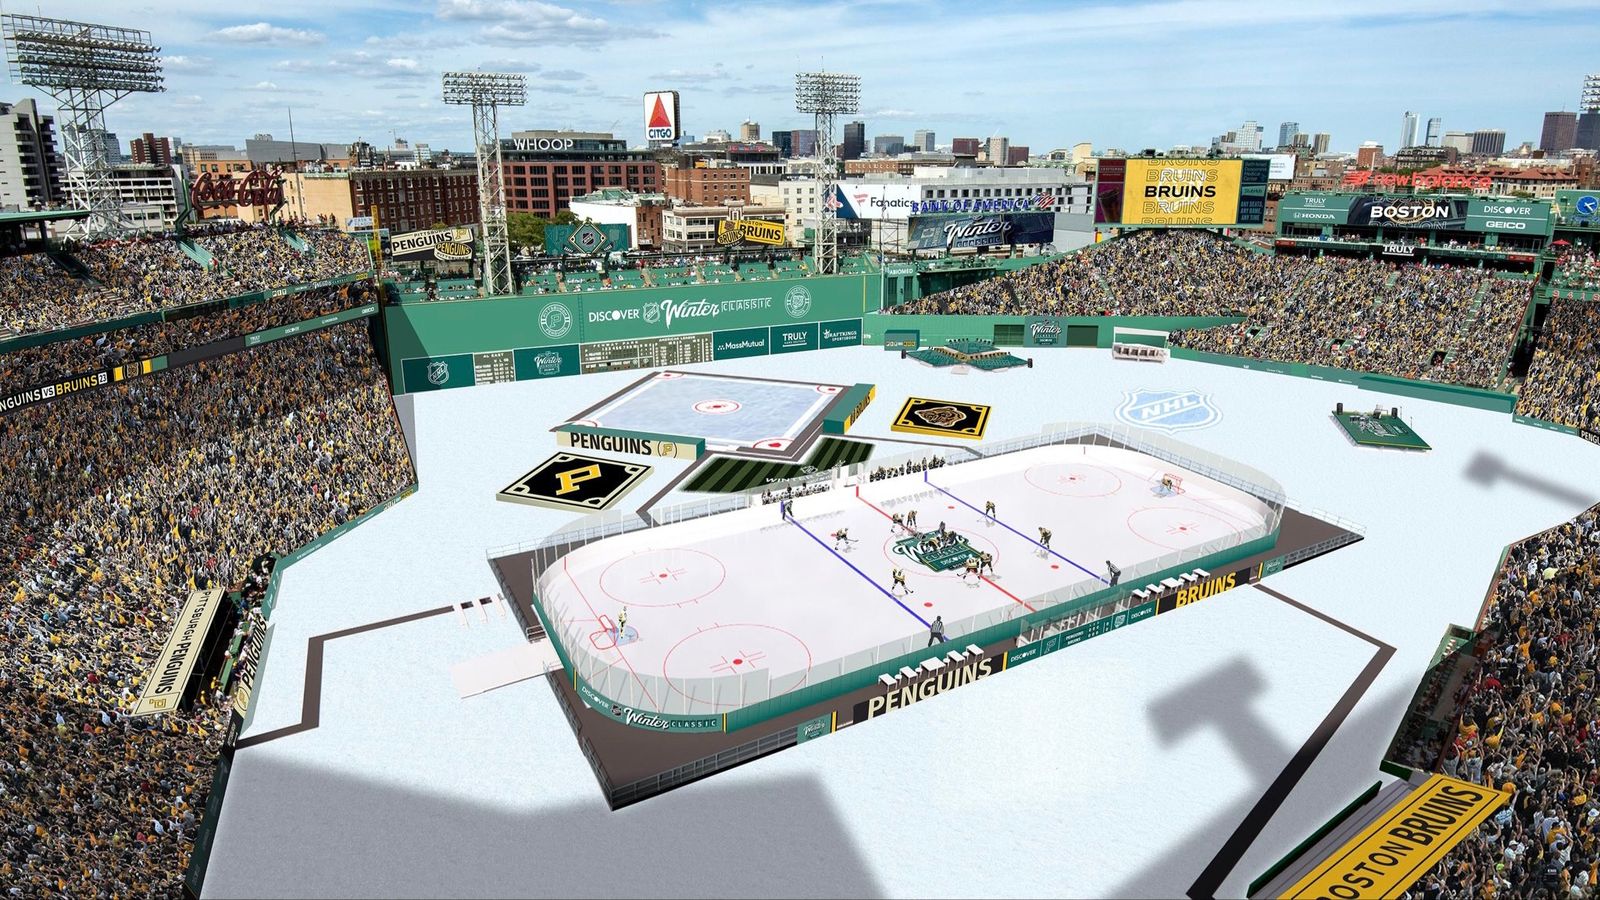 Gallery: Bruins and Penguins face off at second Winter Classic at Fenway  Park – Boston Herald